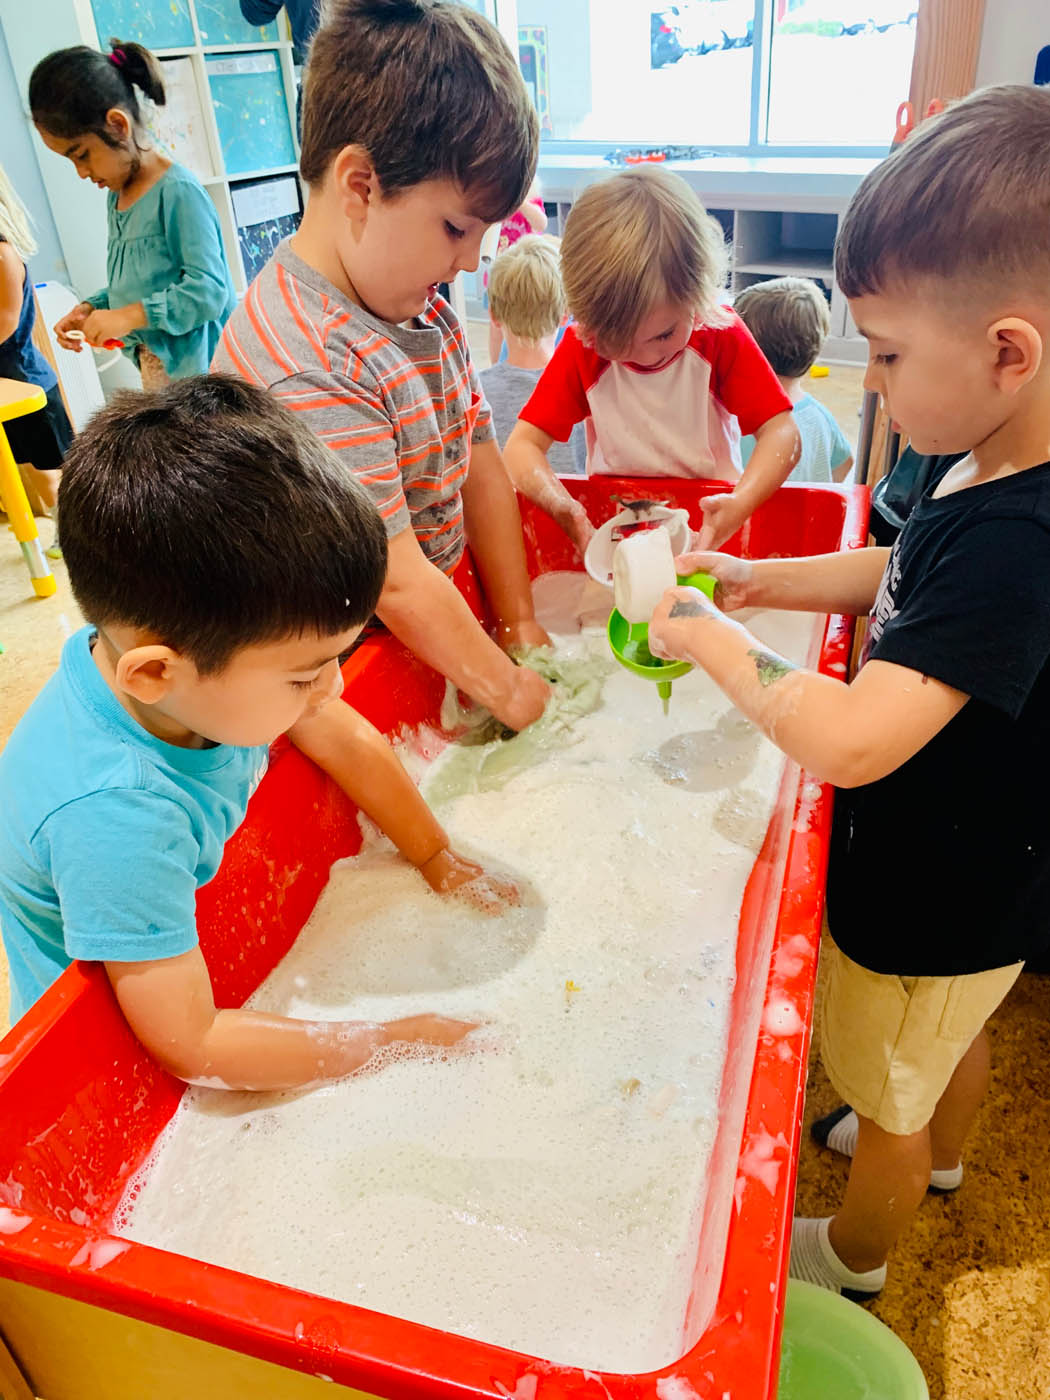 Kids playing in sand at our early childhood education in Steamboat Springs, CO.